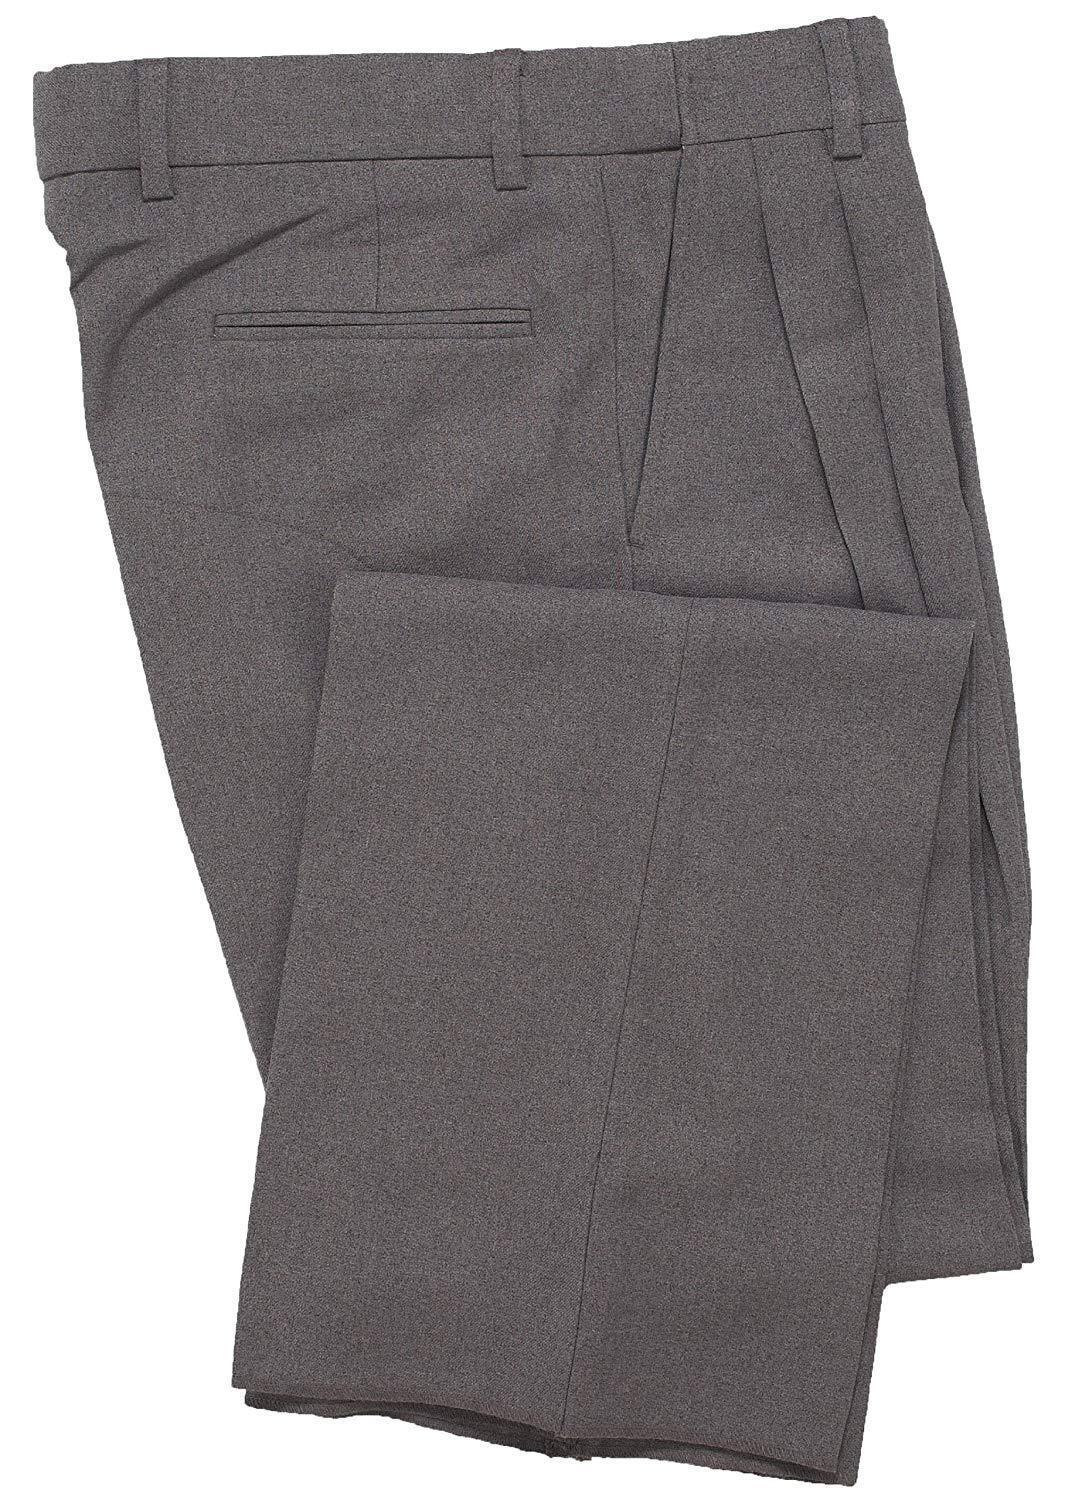 NEW Women's Smitty 4-Way Stretch FLAT FRONT UMPIRE PLATE PANTS